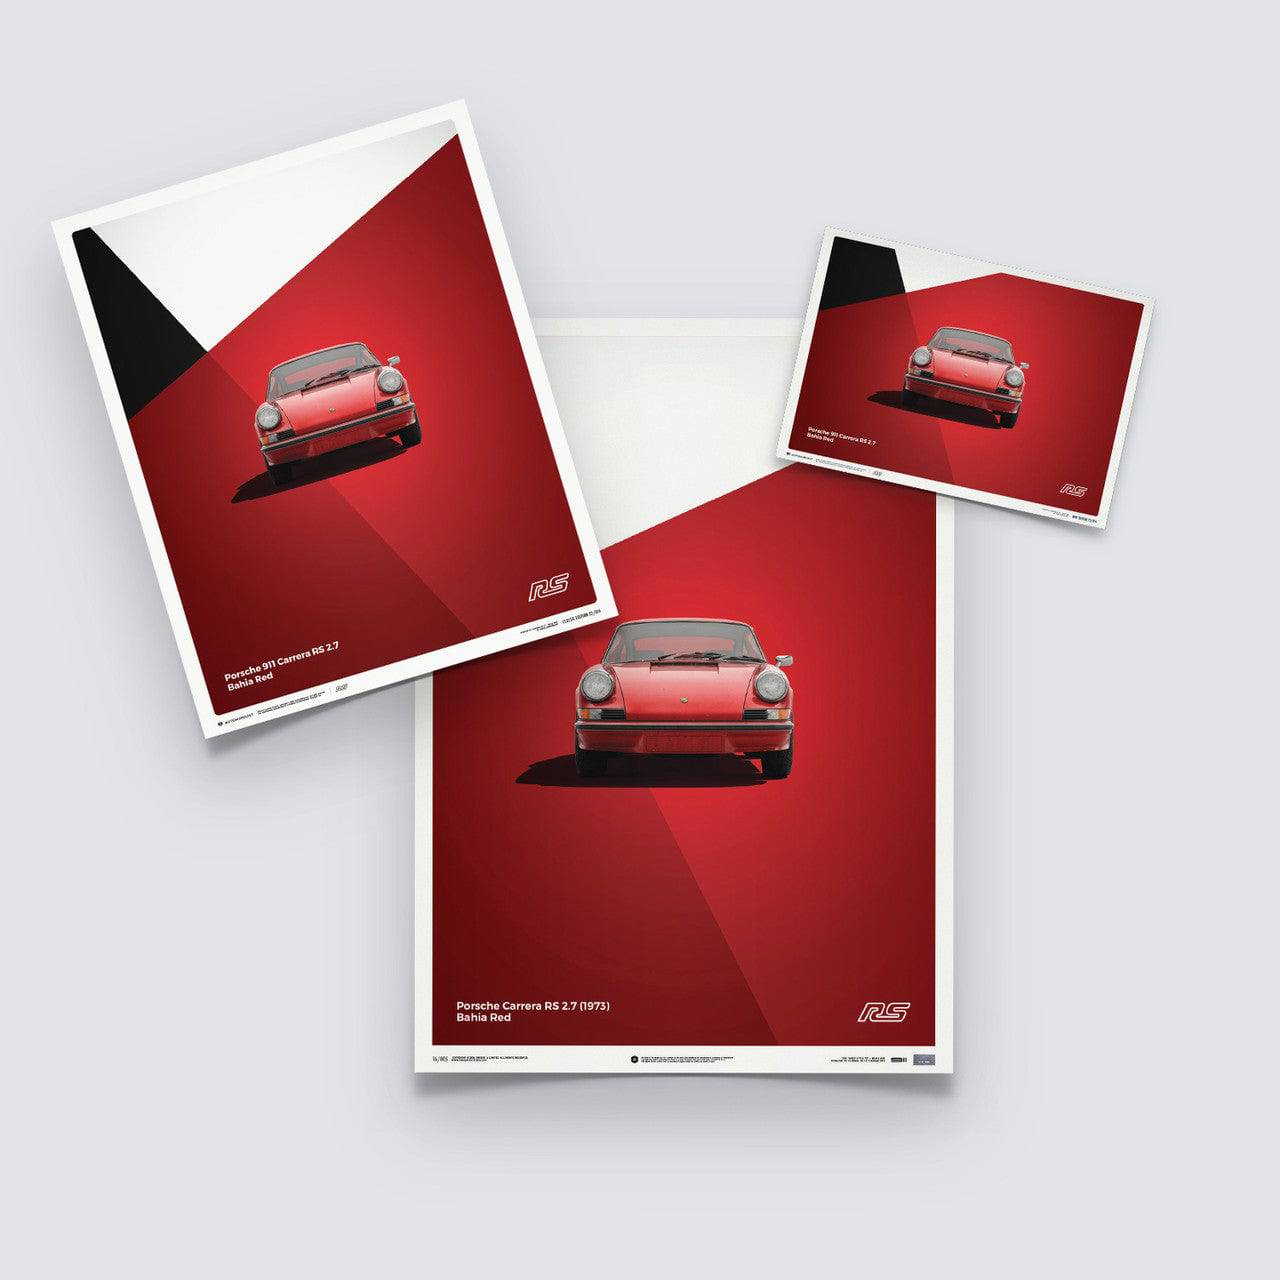 Porsche 911 RS - Red - Limited Poster